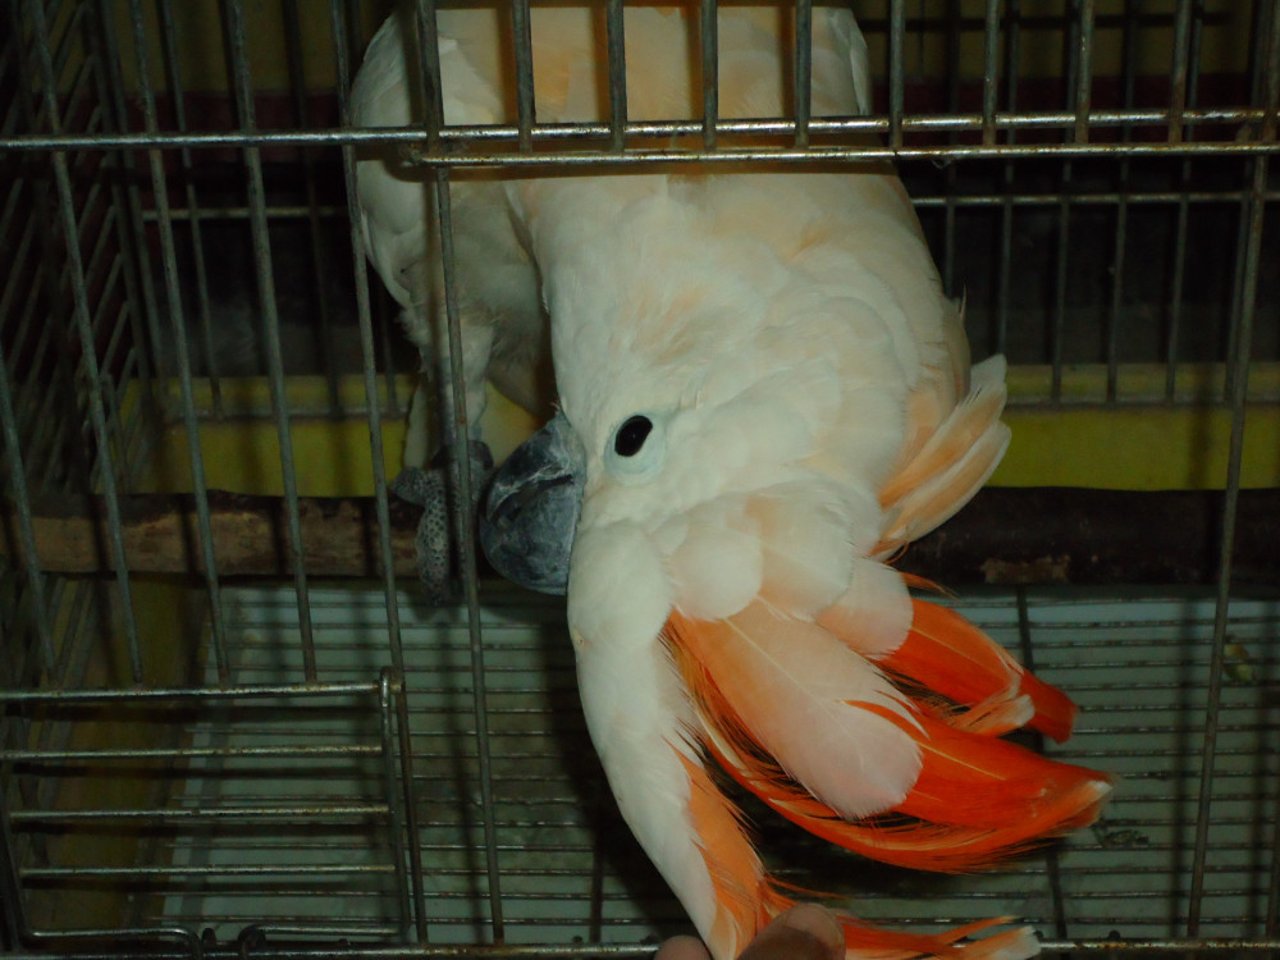  Cockatoo kept by private breeder in Bengal.  Image by Shubhobroto Ghosh